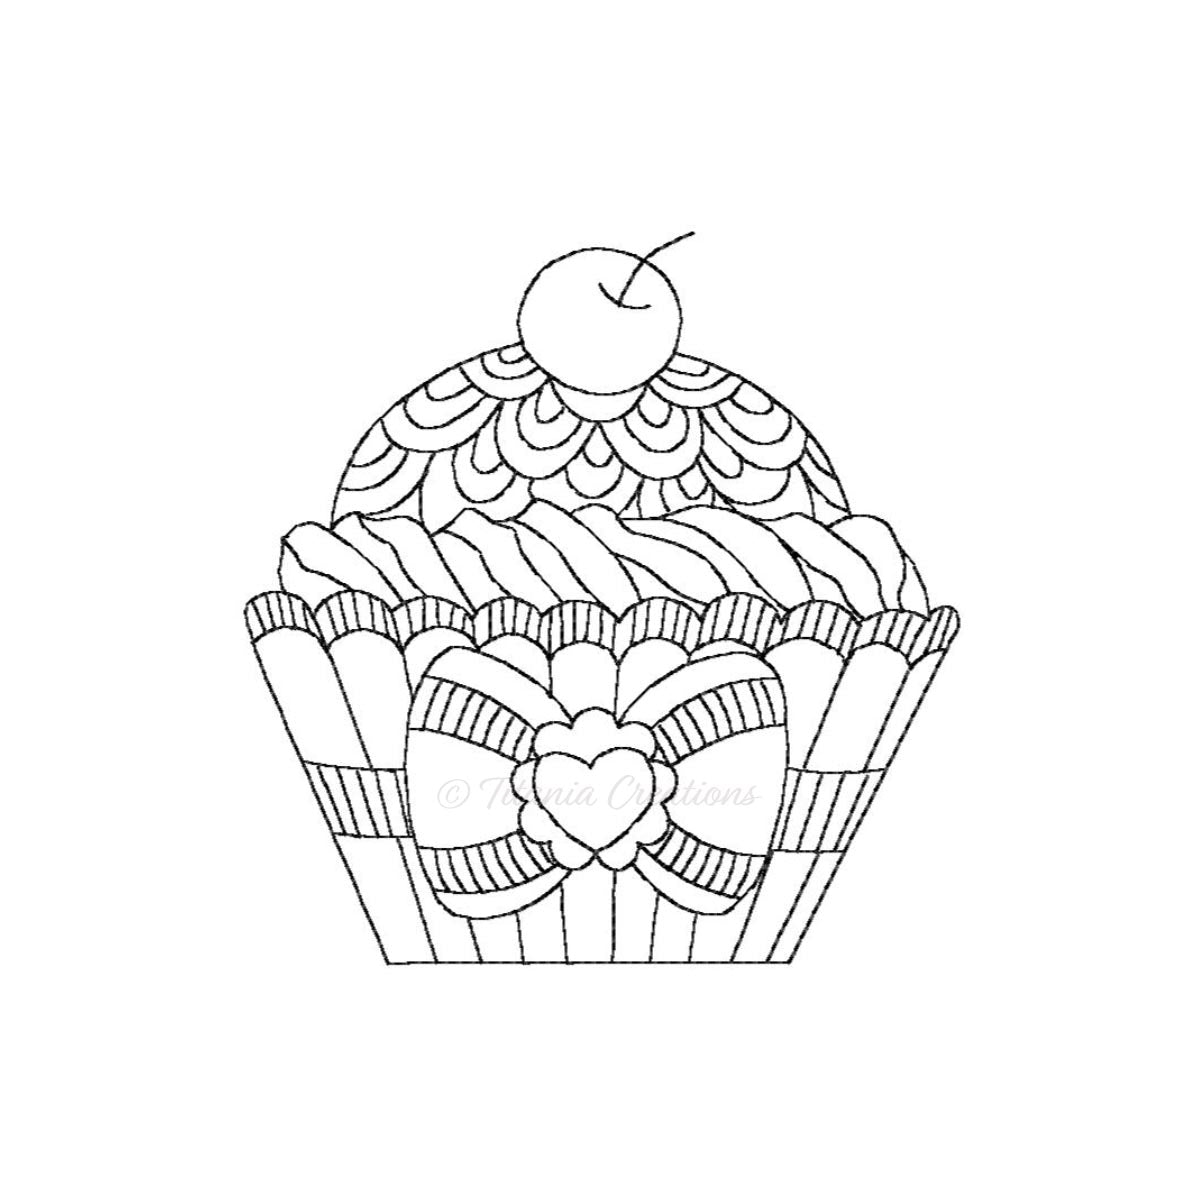 Sketch Cup Cake 4x4 5x7